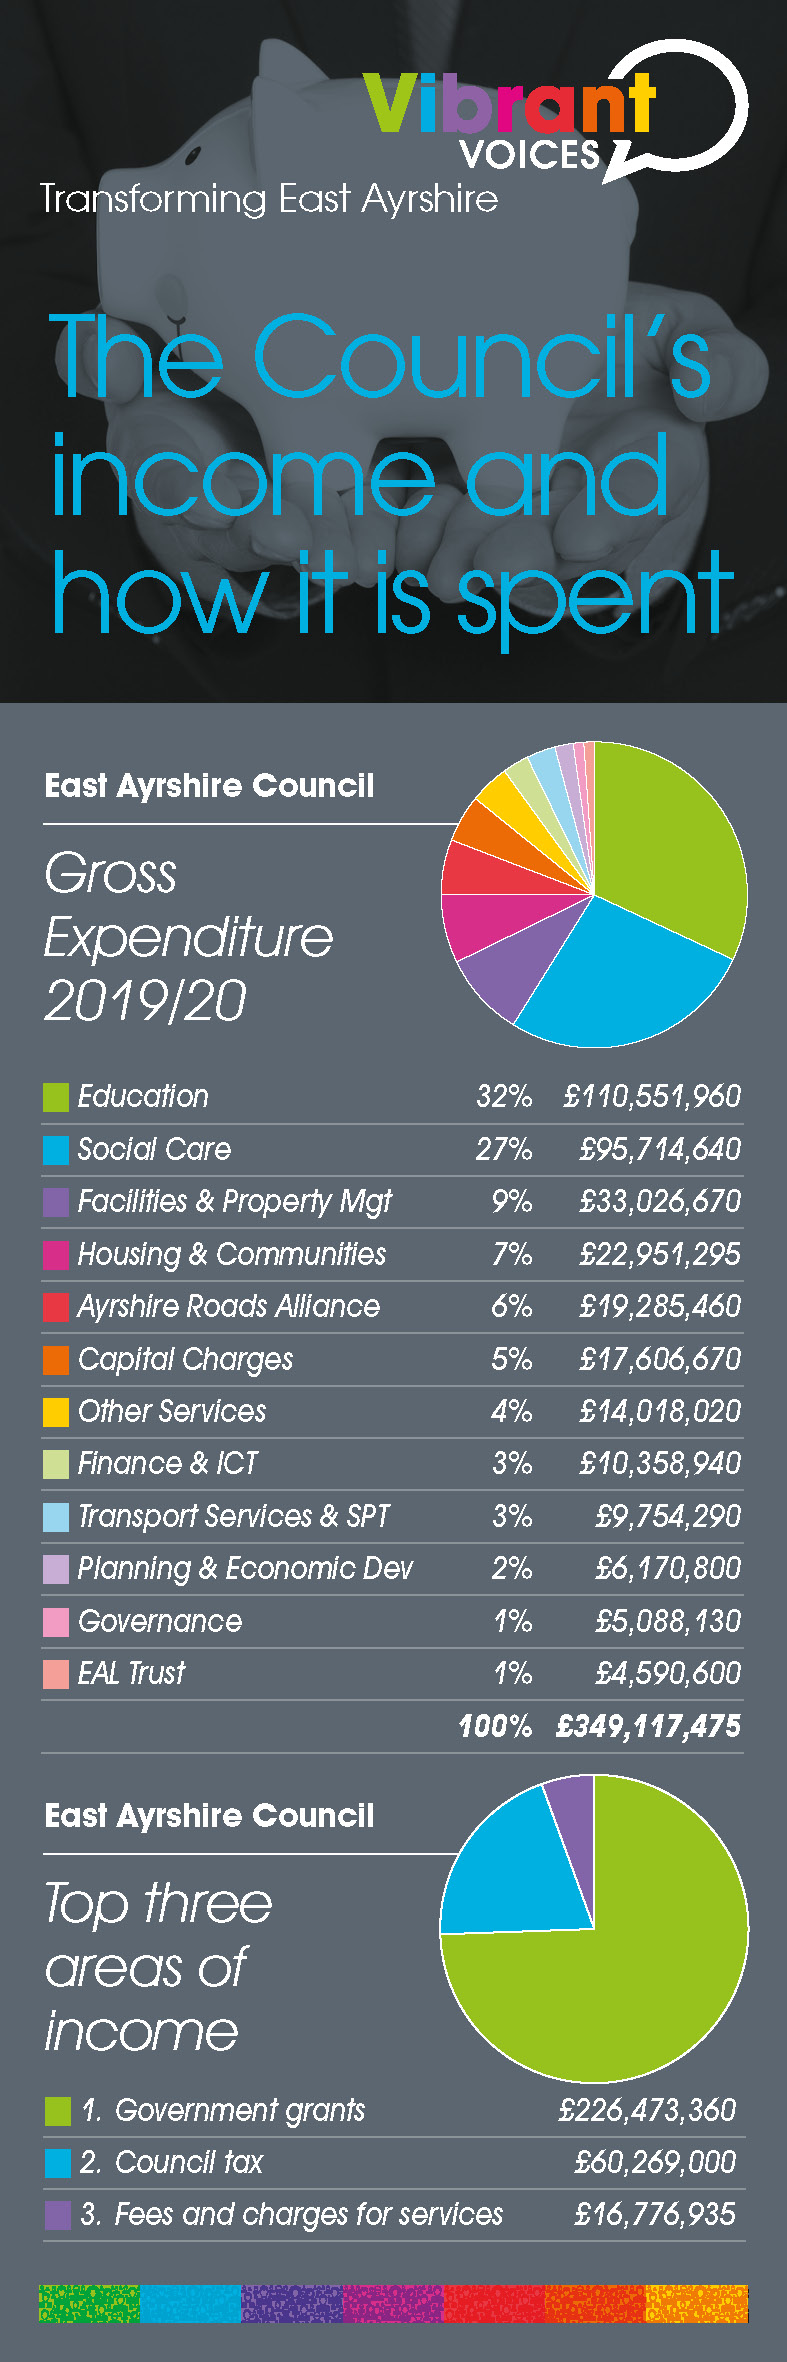 Infographic showing the Council's income and expenditure for 2019/20 and how it is spent